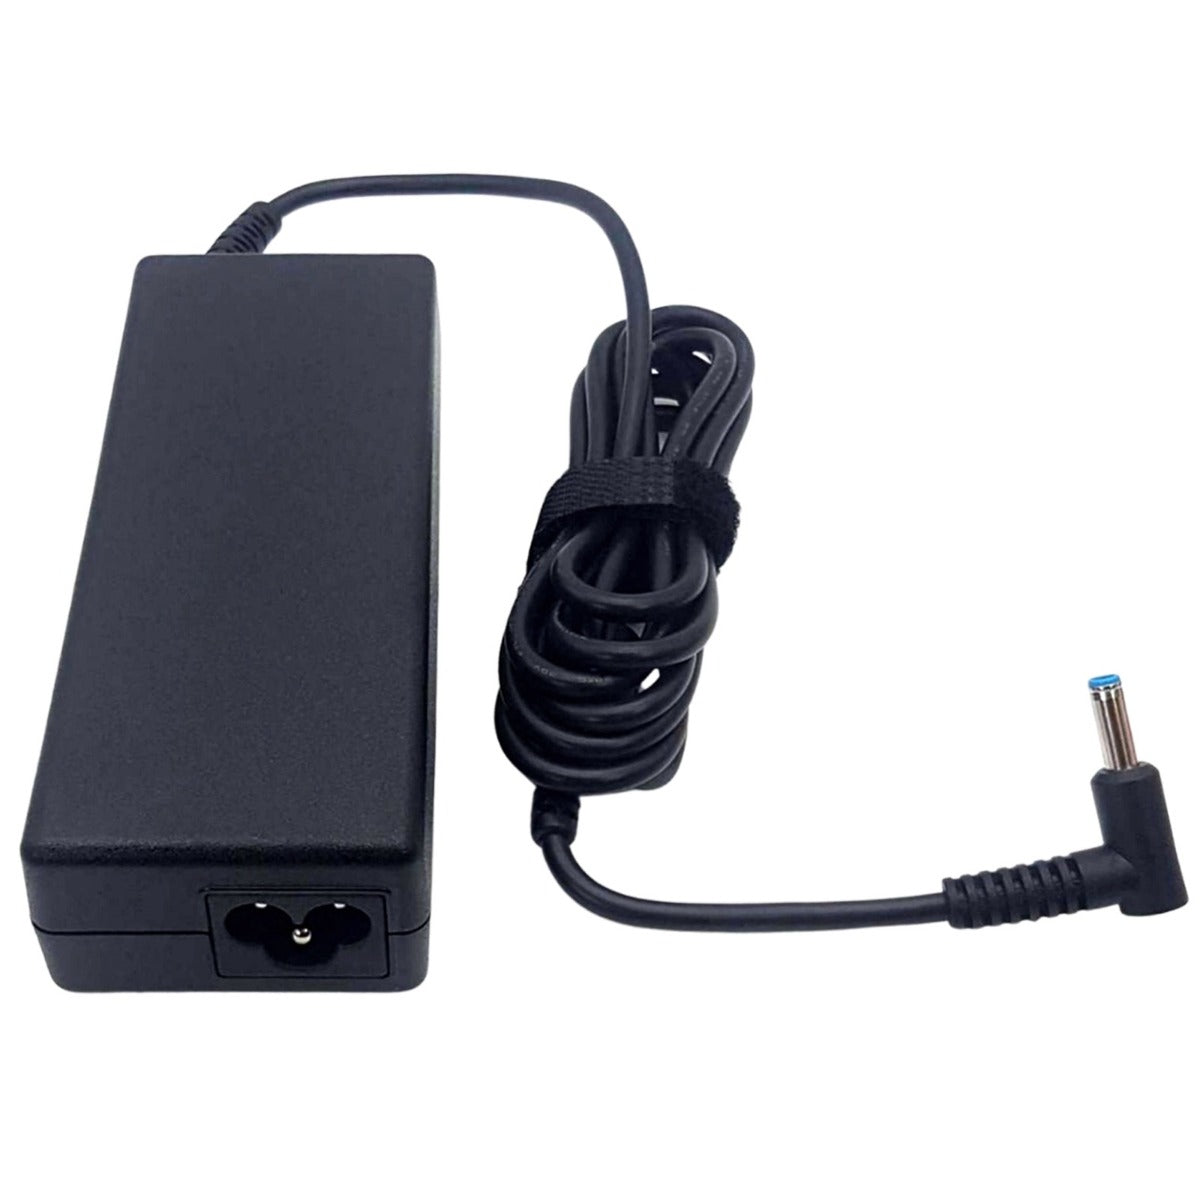 New Genuine Delta 90W 19V 4.74A Laptop Adapter 4.5mm x 3.0mm Blue Tip Power Charger